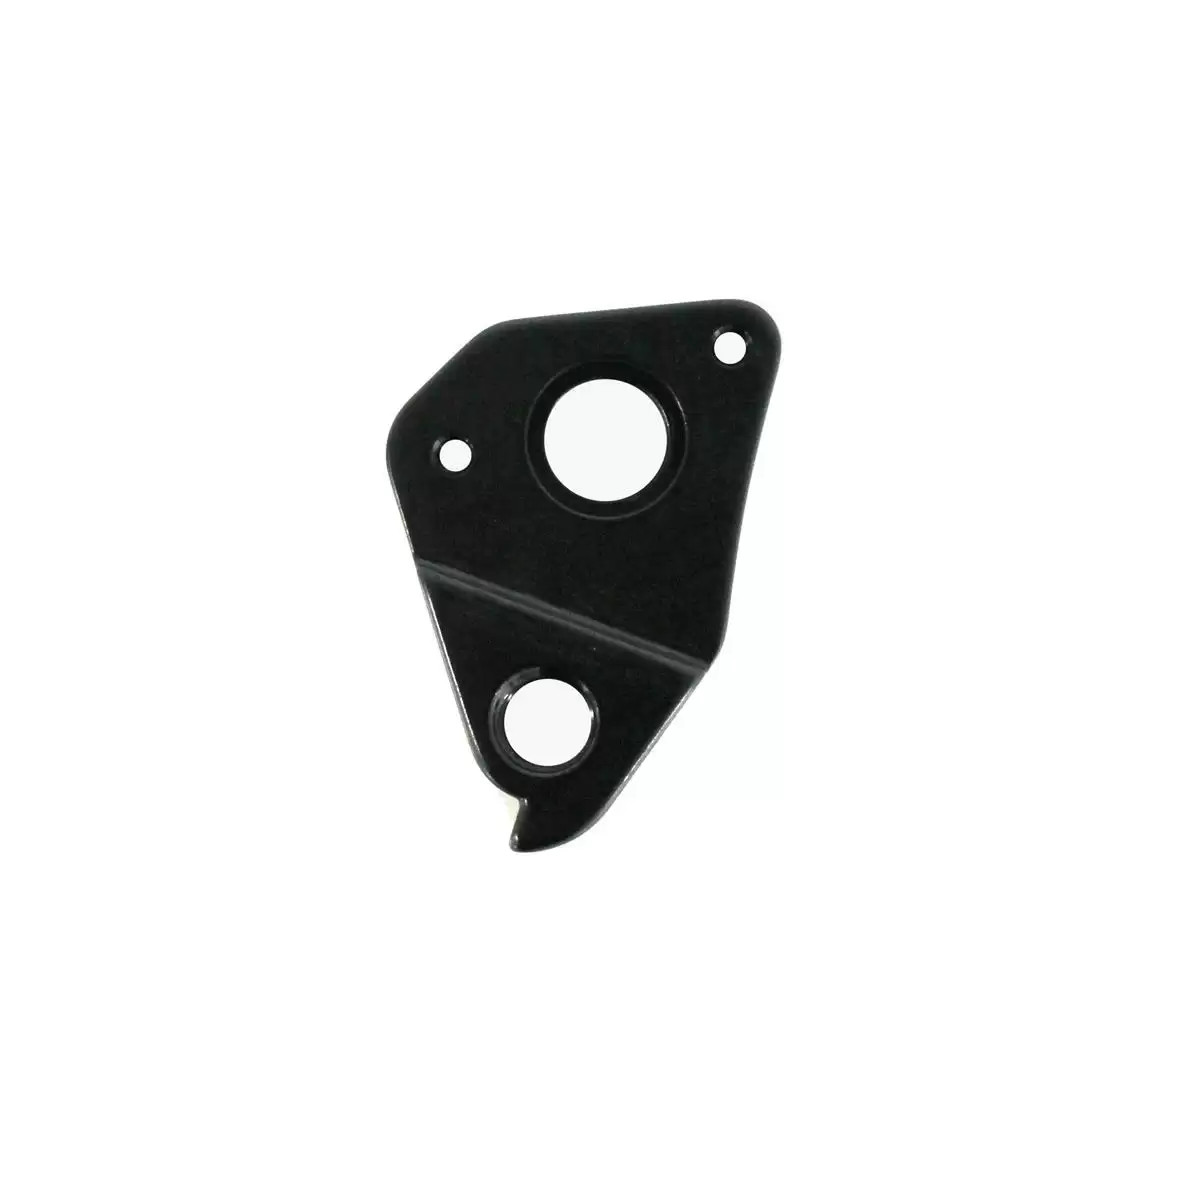 Derailleur hanger FROT0139 for all Hybride ASX models from 2020 - image